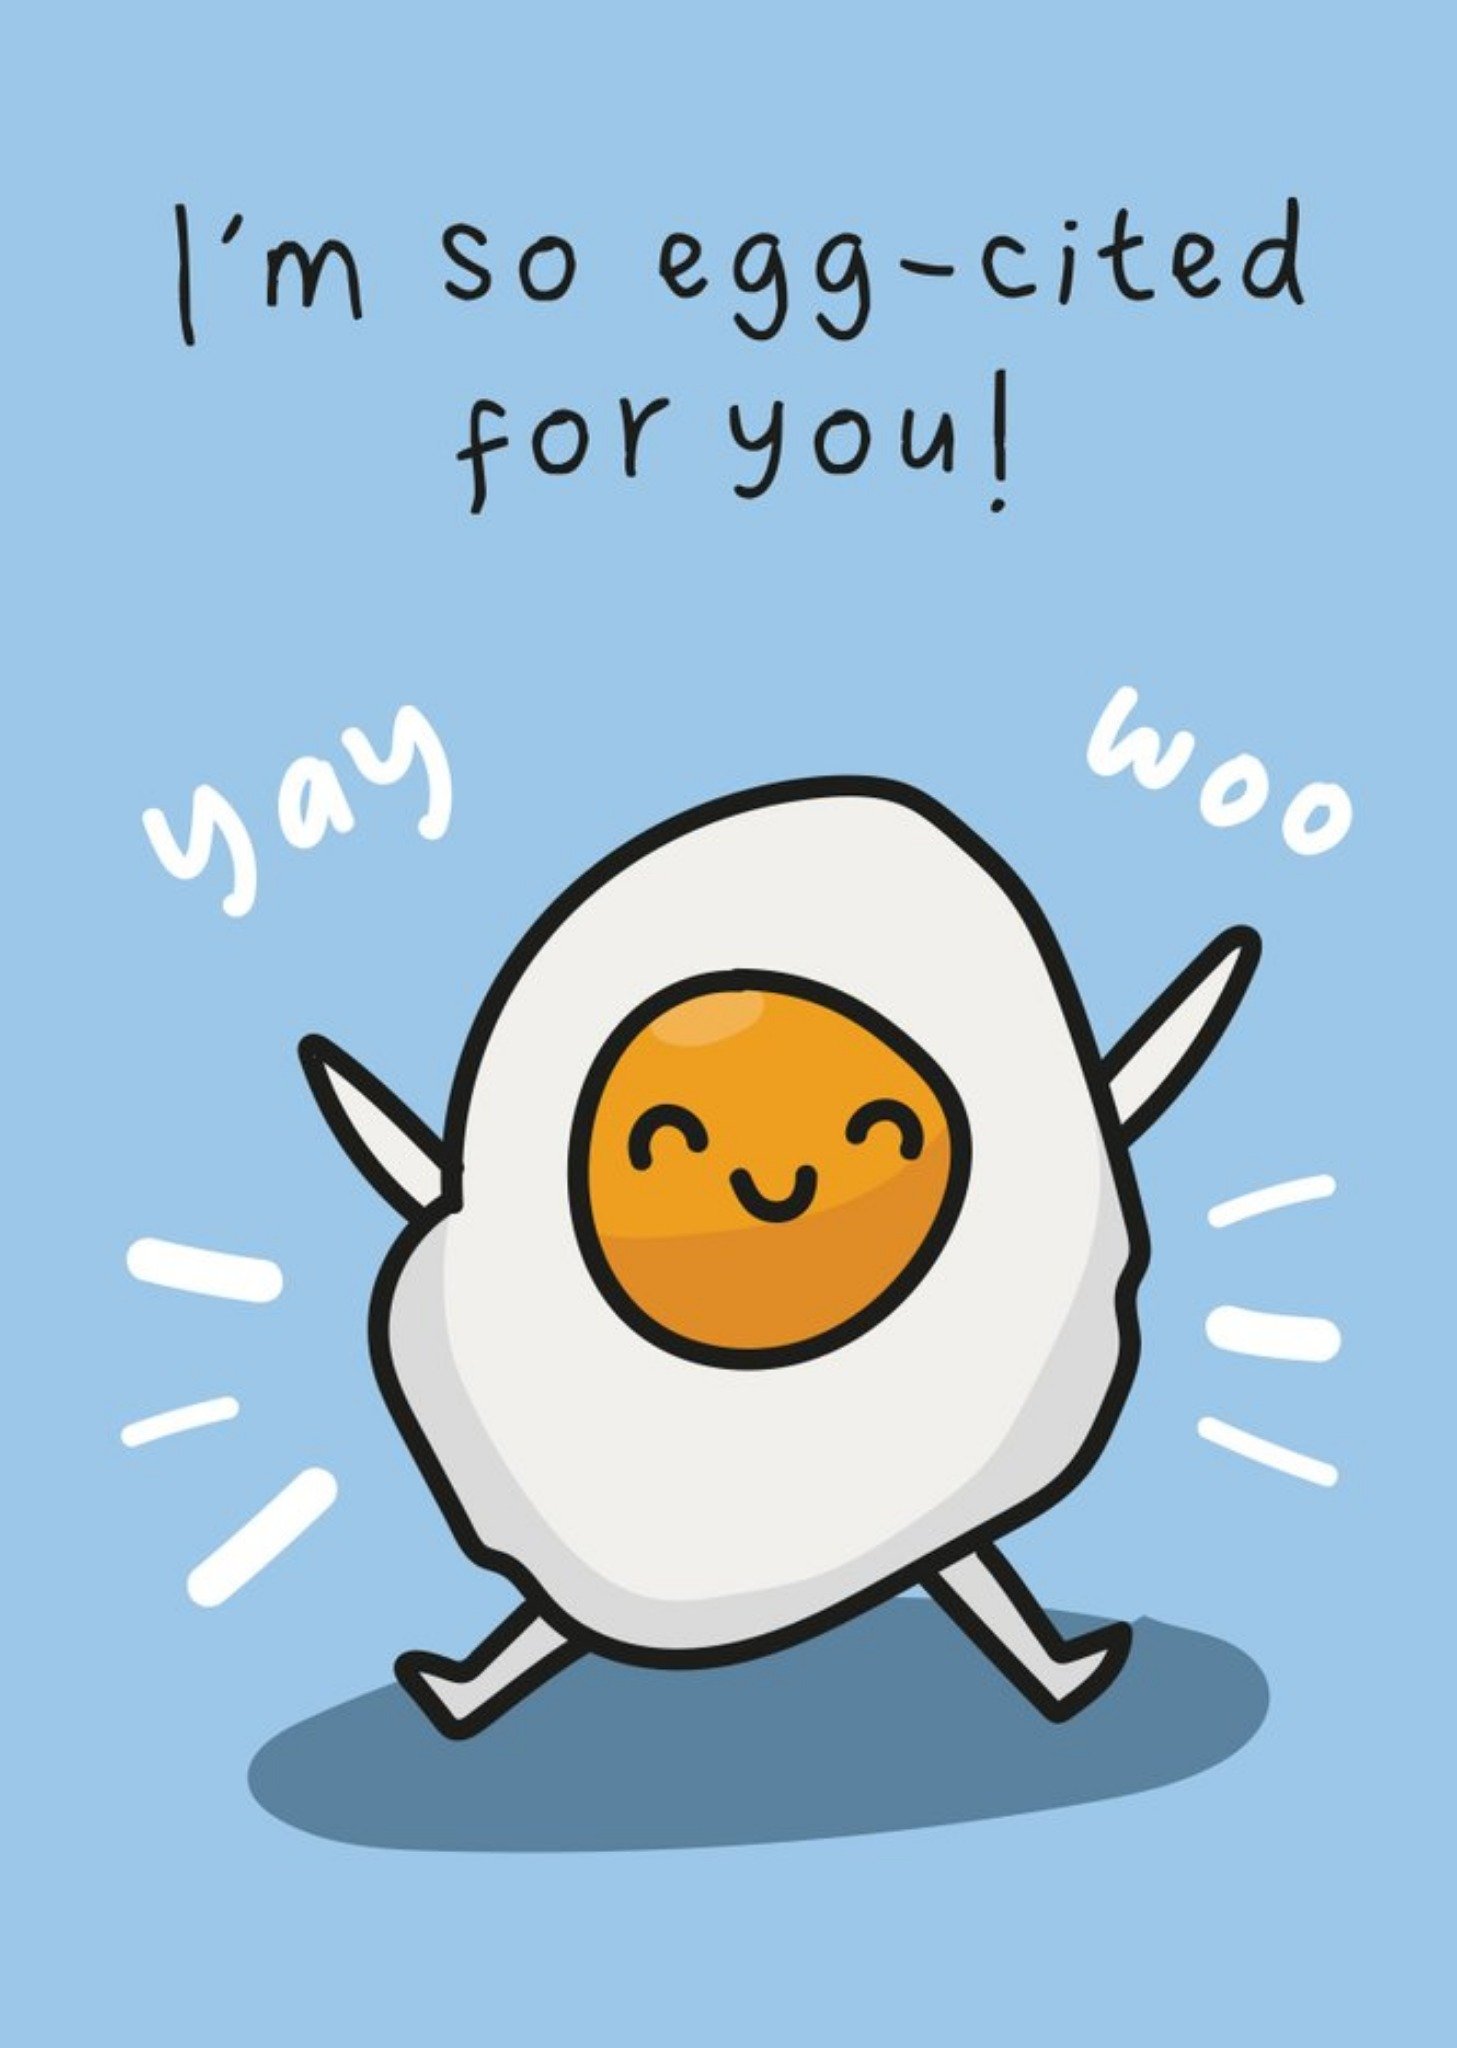 Moonpig I'm So Eggcited For You Funny Pun Card, Large